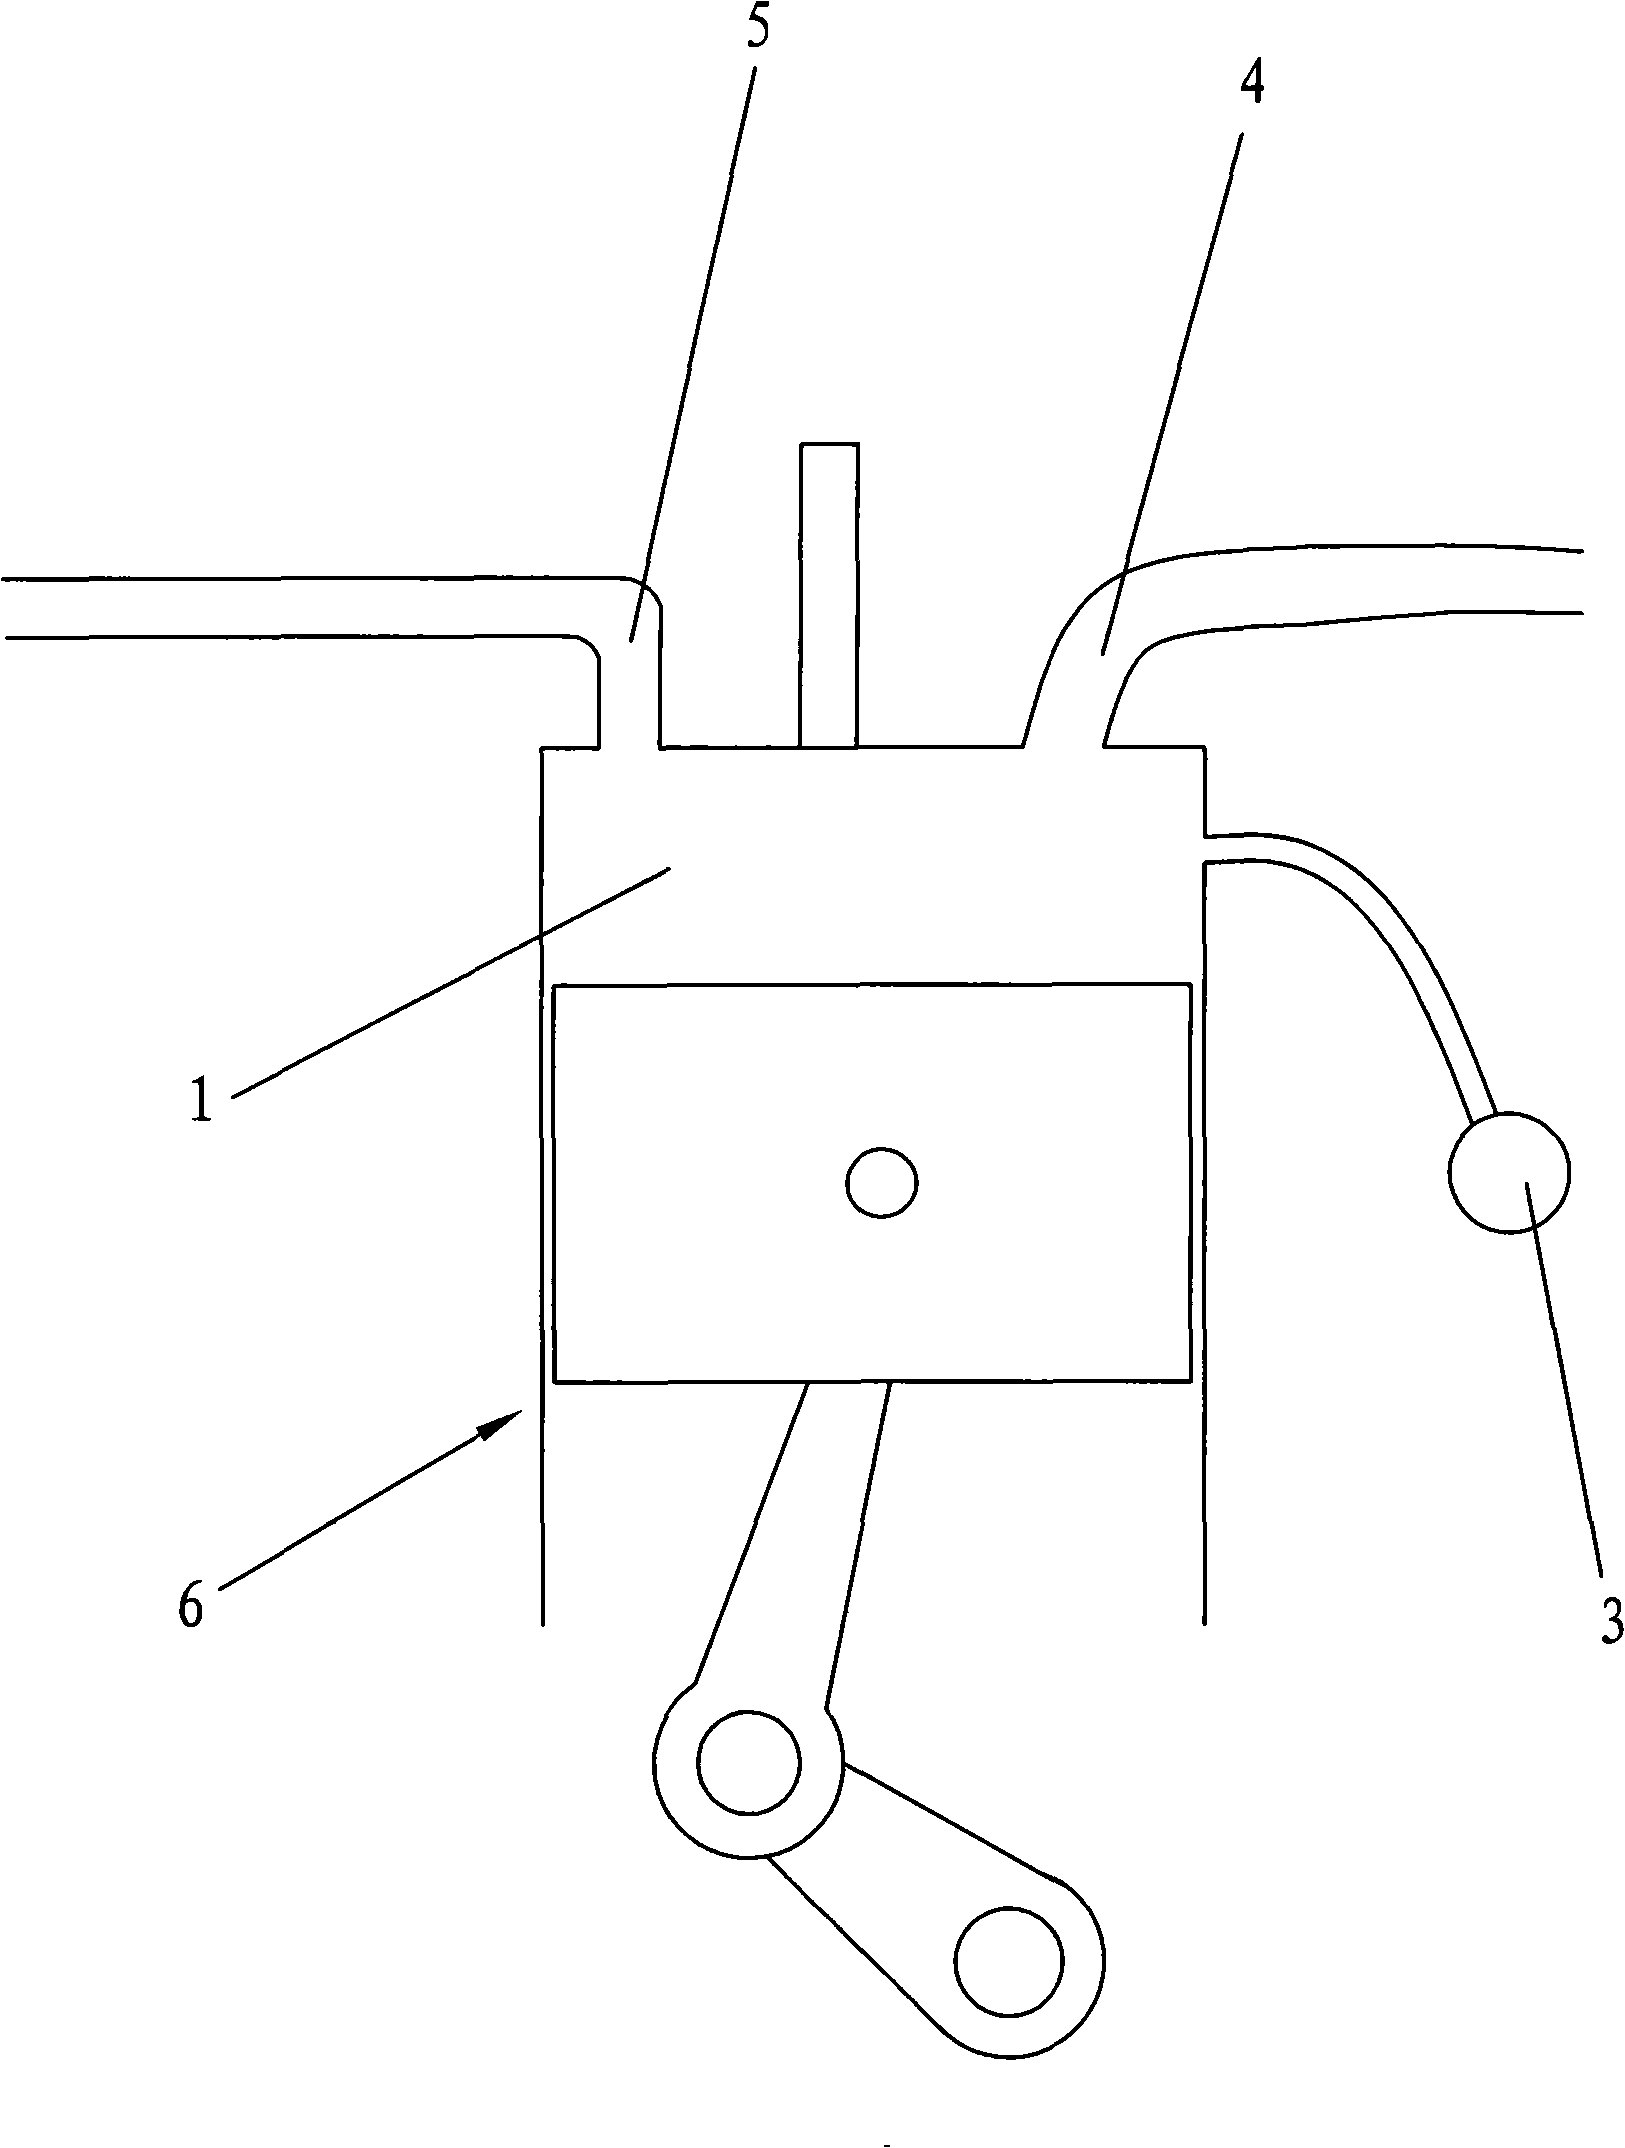 Method for increasing working power of engine by moisture